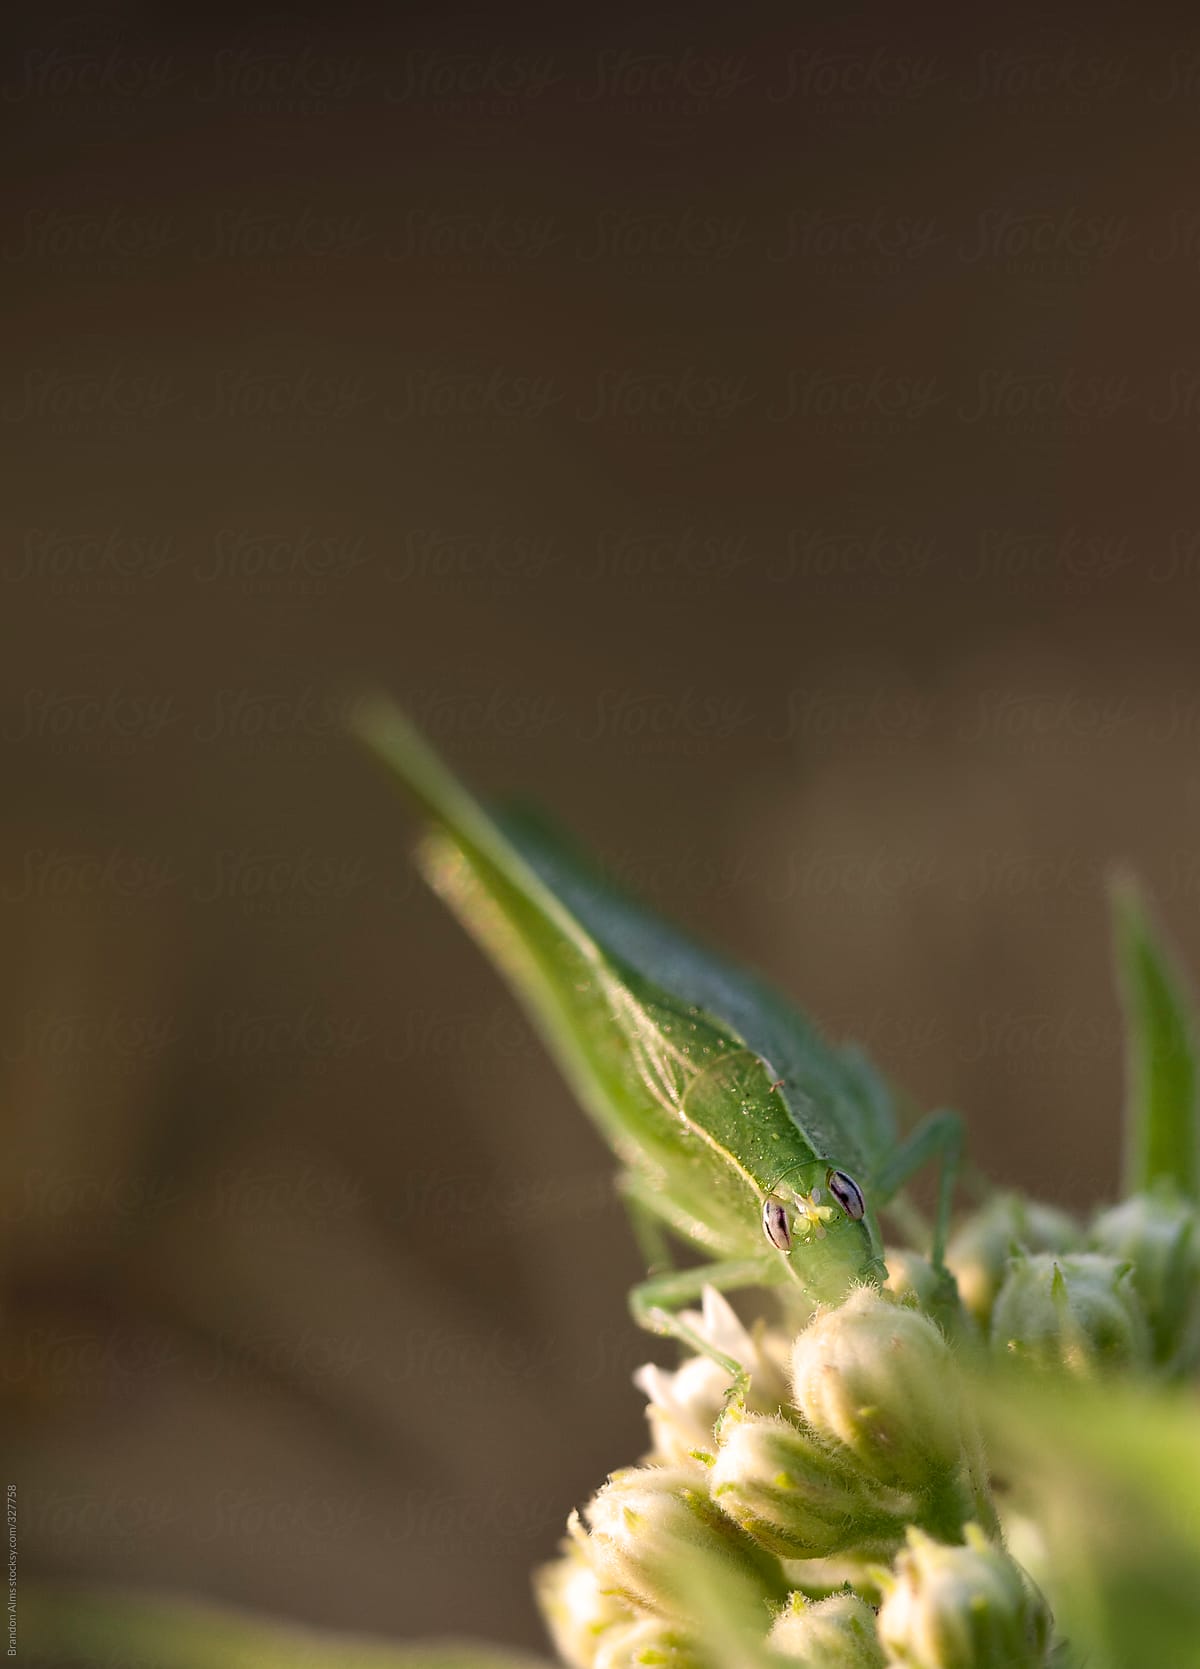 Macro of a Katydid Insect on a Flowering Plant